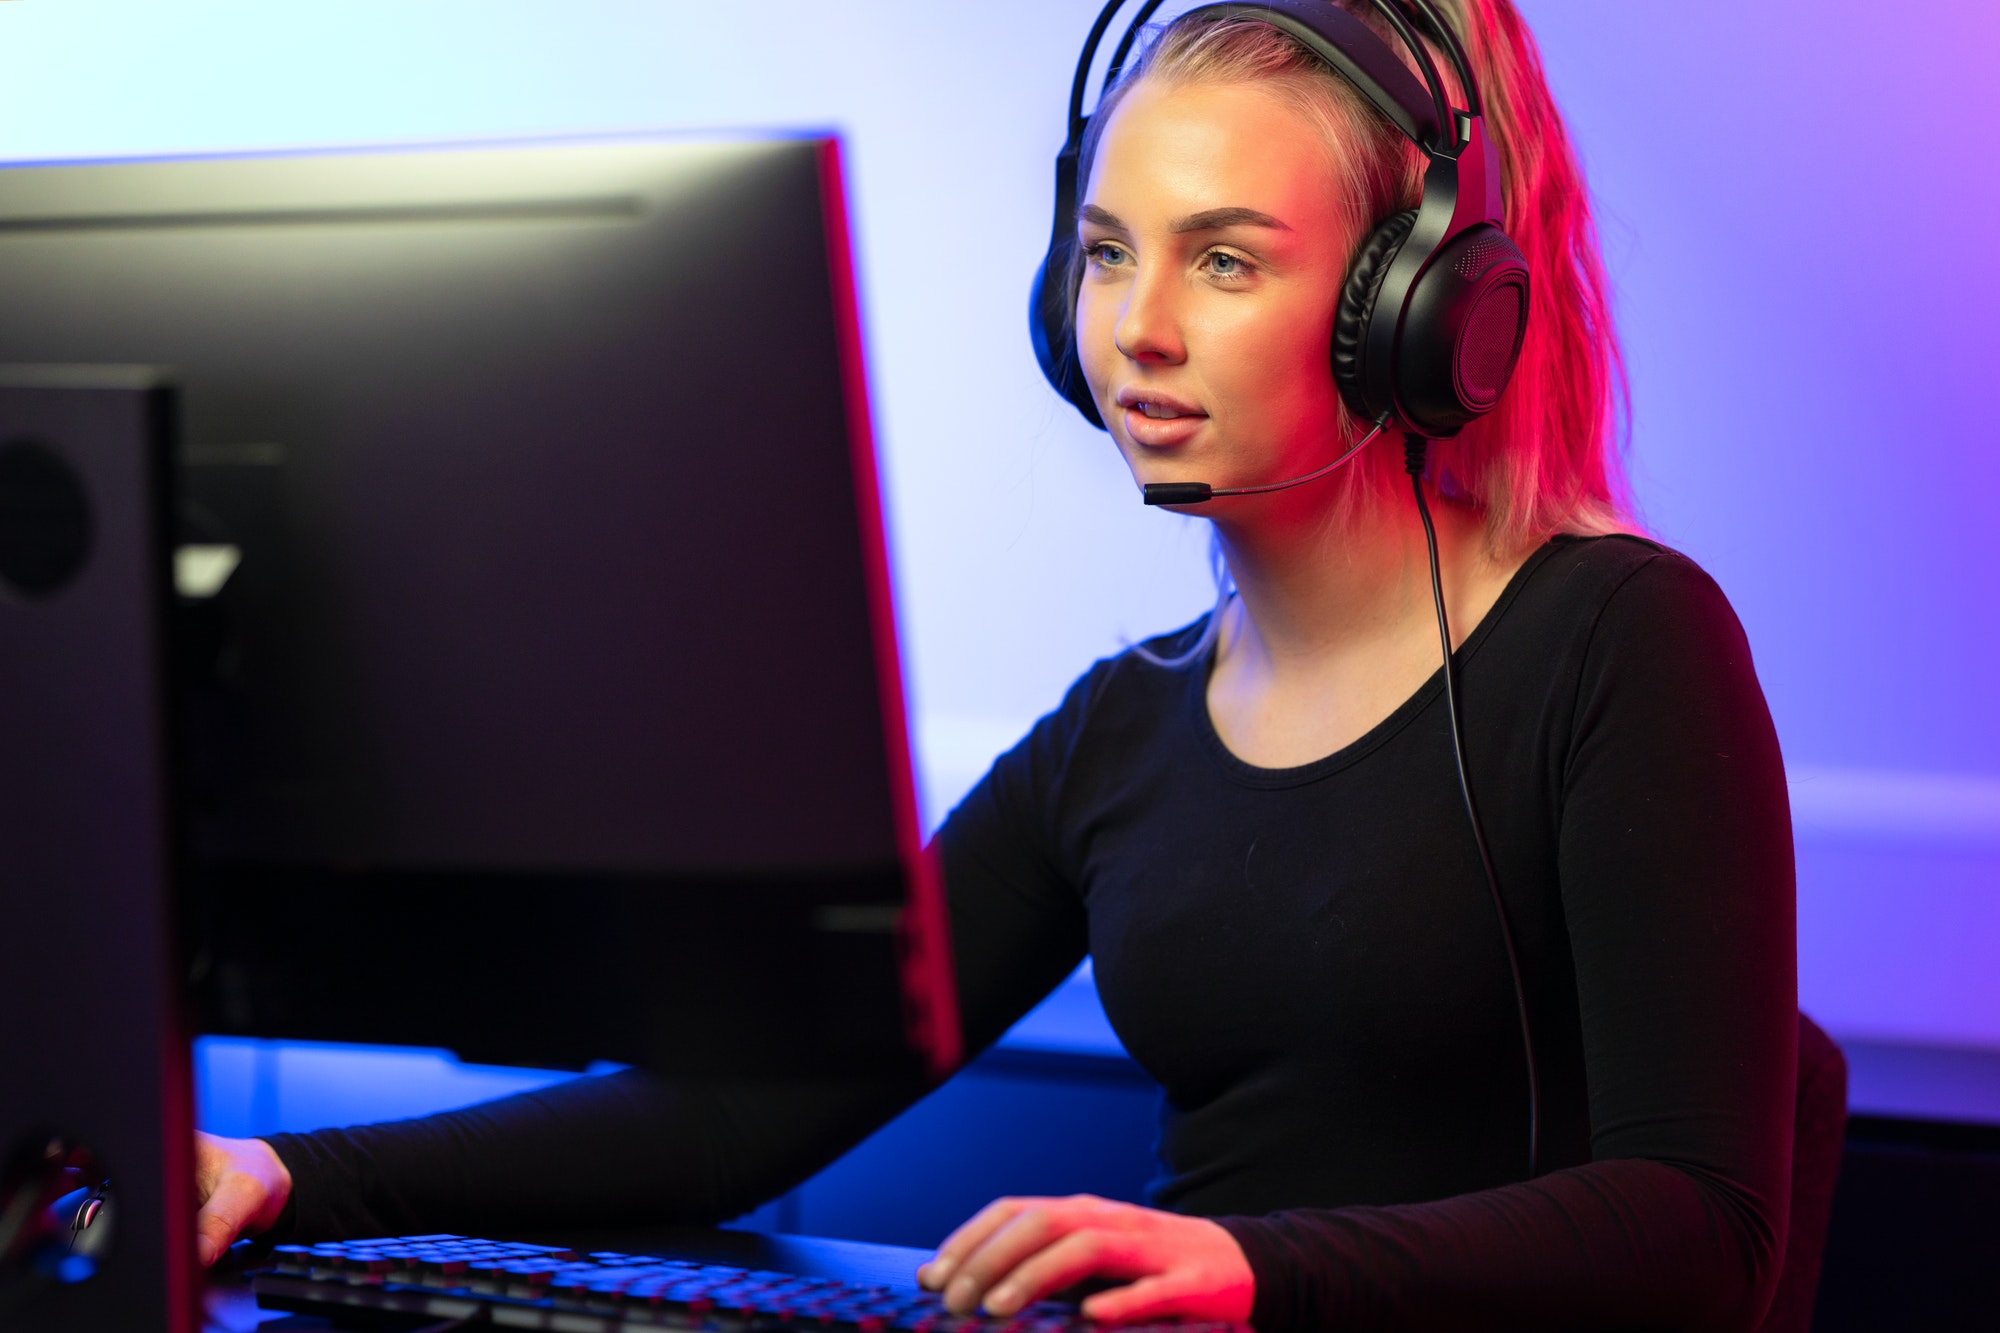 What to Look for when Choosing an Online Gaming Site